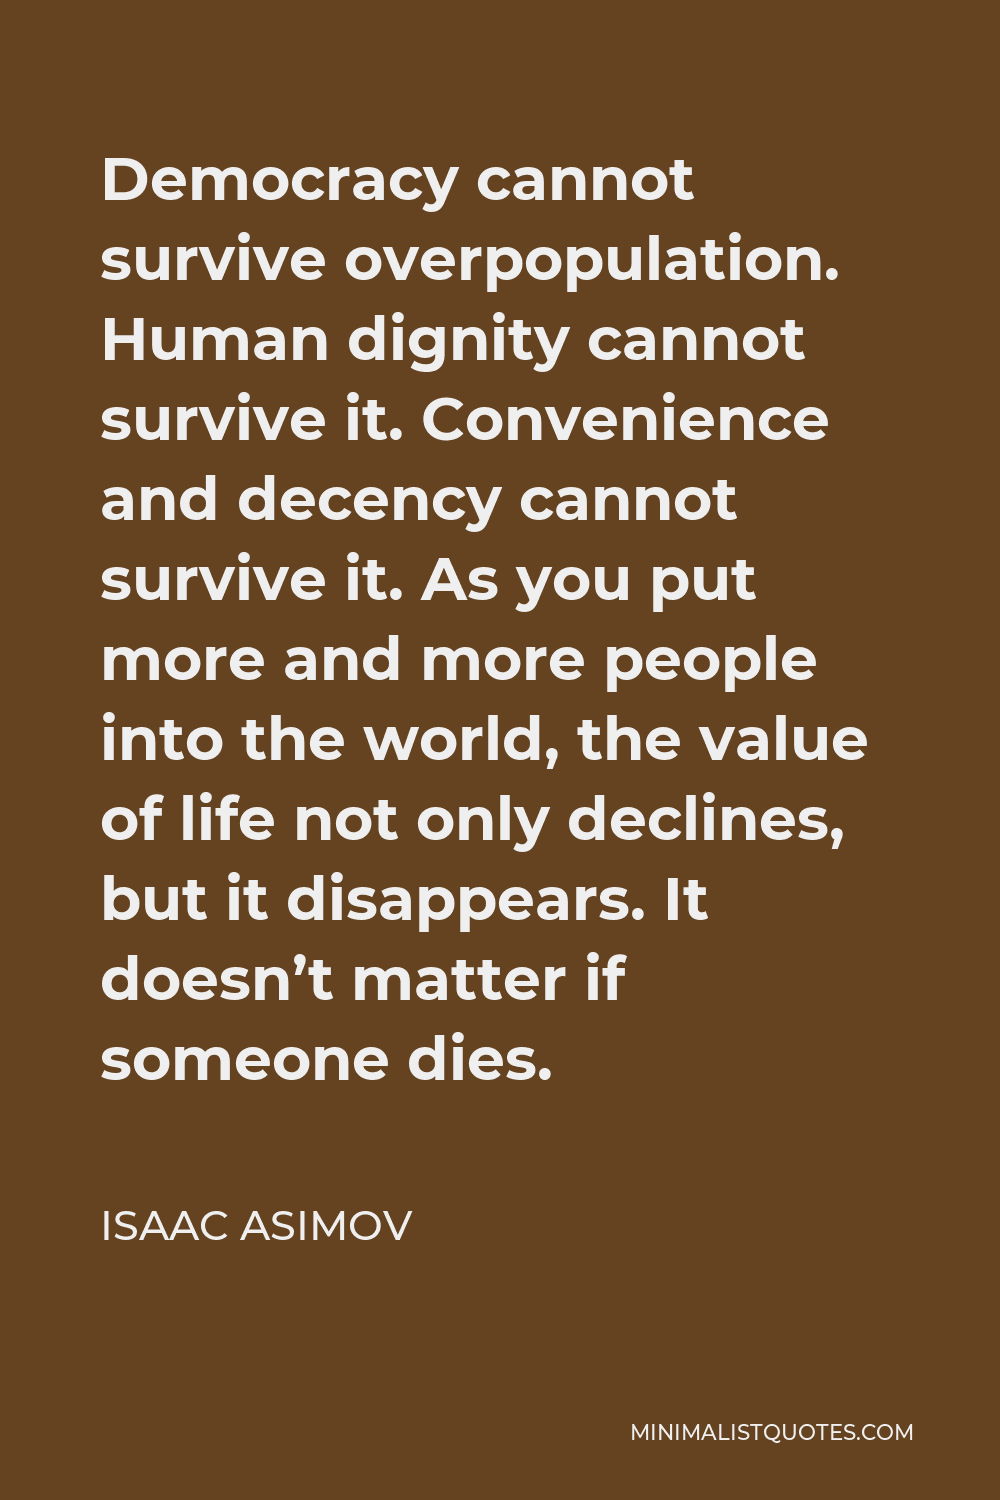 Isaac Asimov Quote - Democracy cannot survive overpopulation. Human dignity cannot survive it. Convenience and decency cannot survive it. As you put more and more people into the world, the value of life not only declines, but it disappears. It doesn’t matter if someone dies.